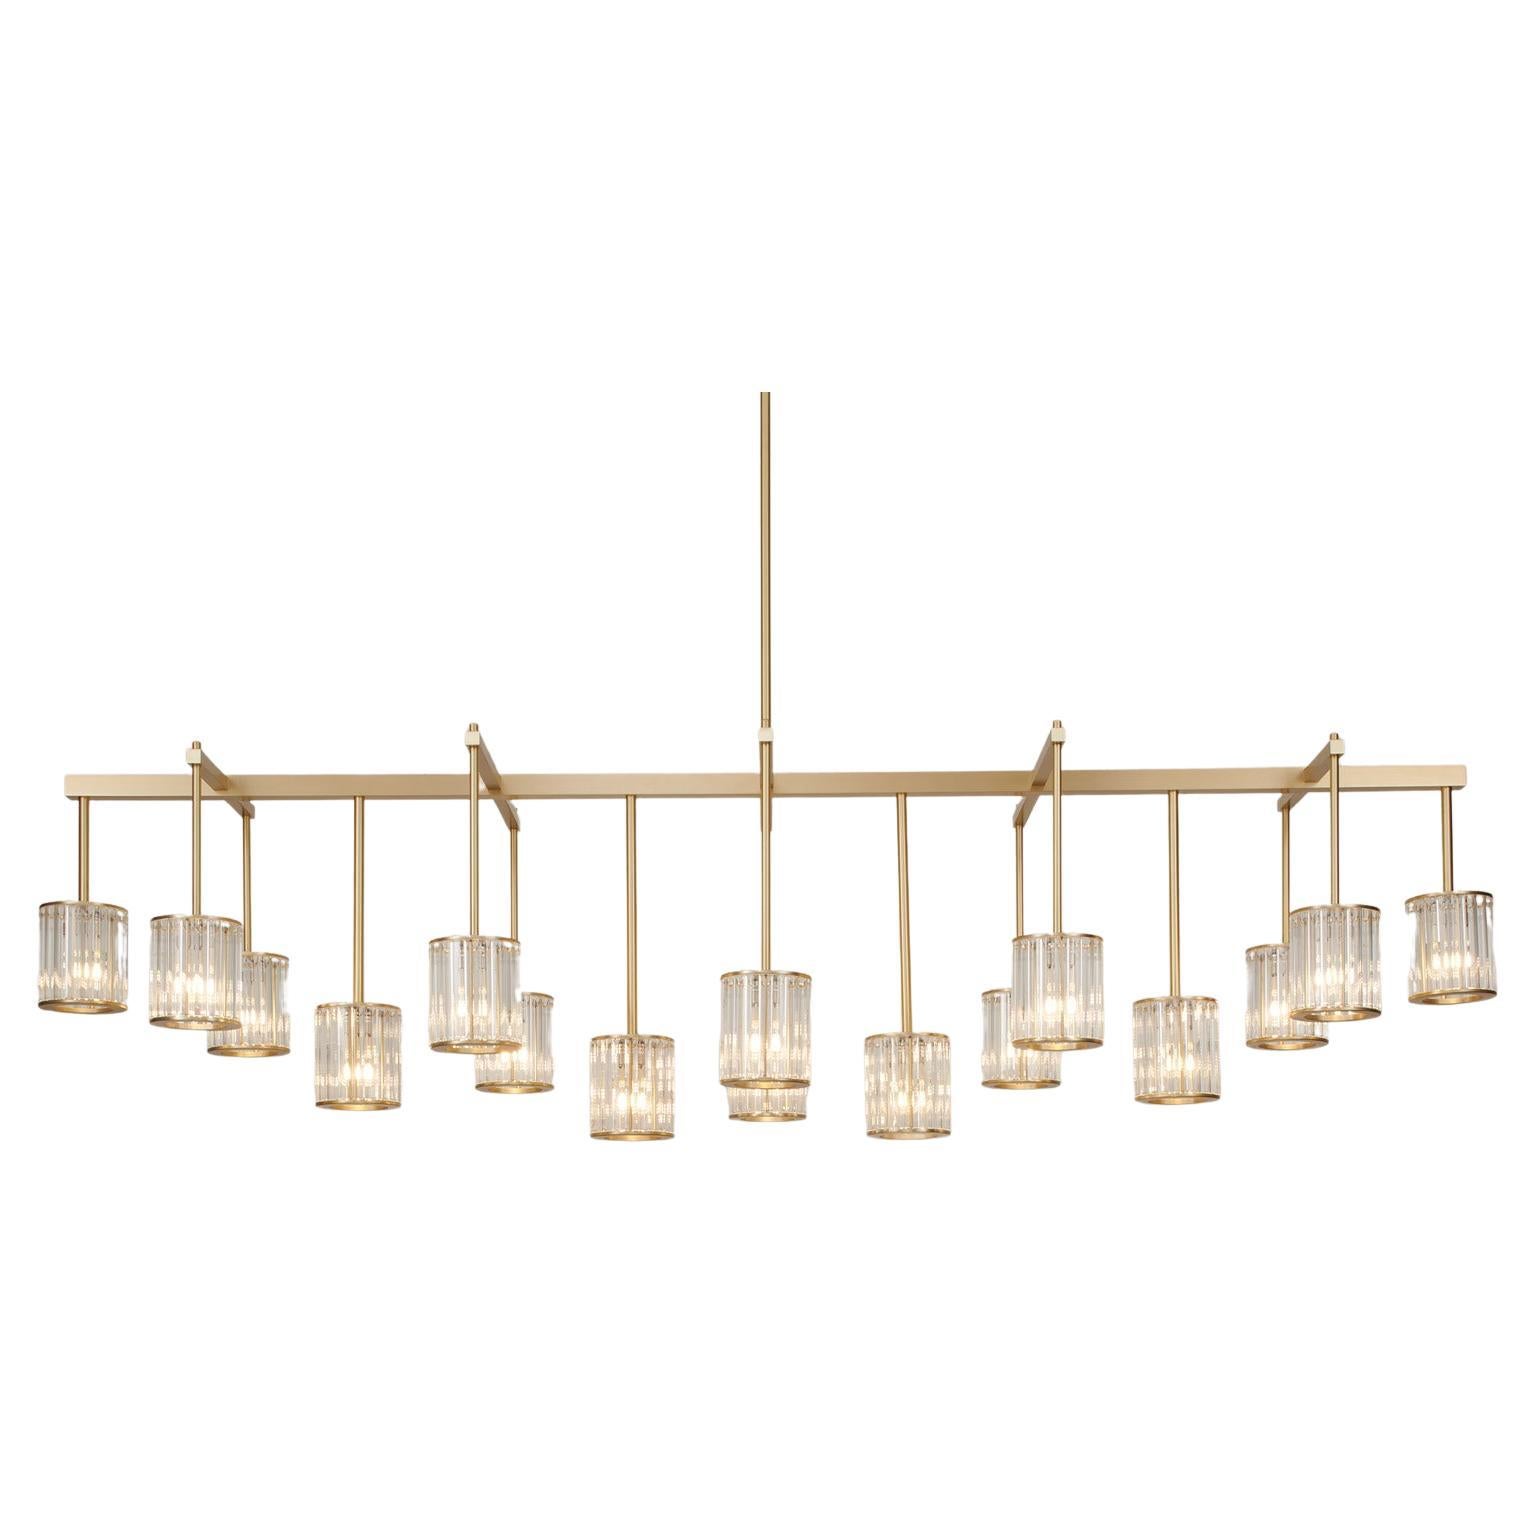 Flute Beam Chandelier with 16 Arms in Brushed Brass and Clear Glass Diffusers